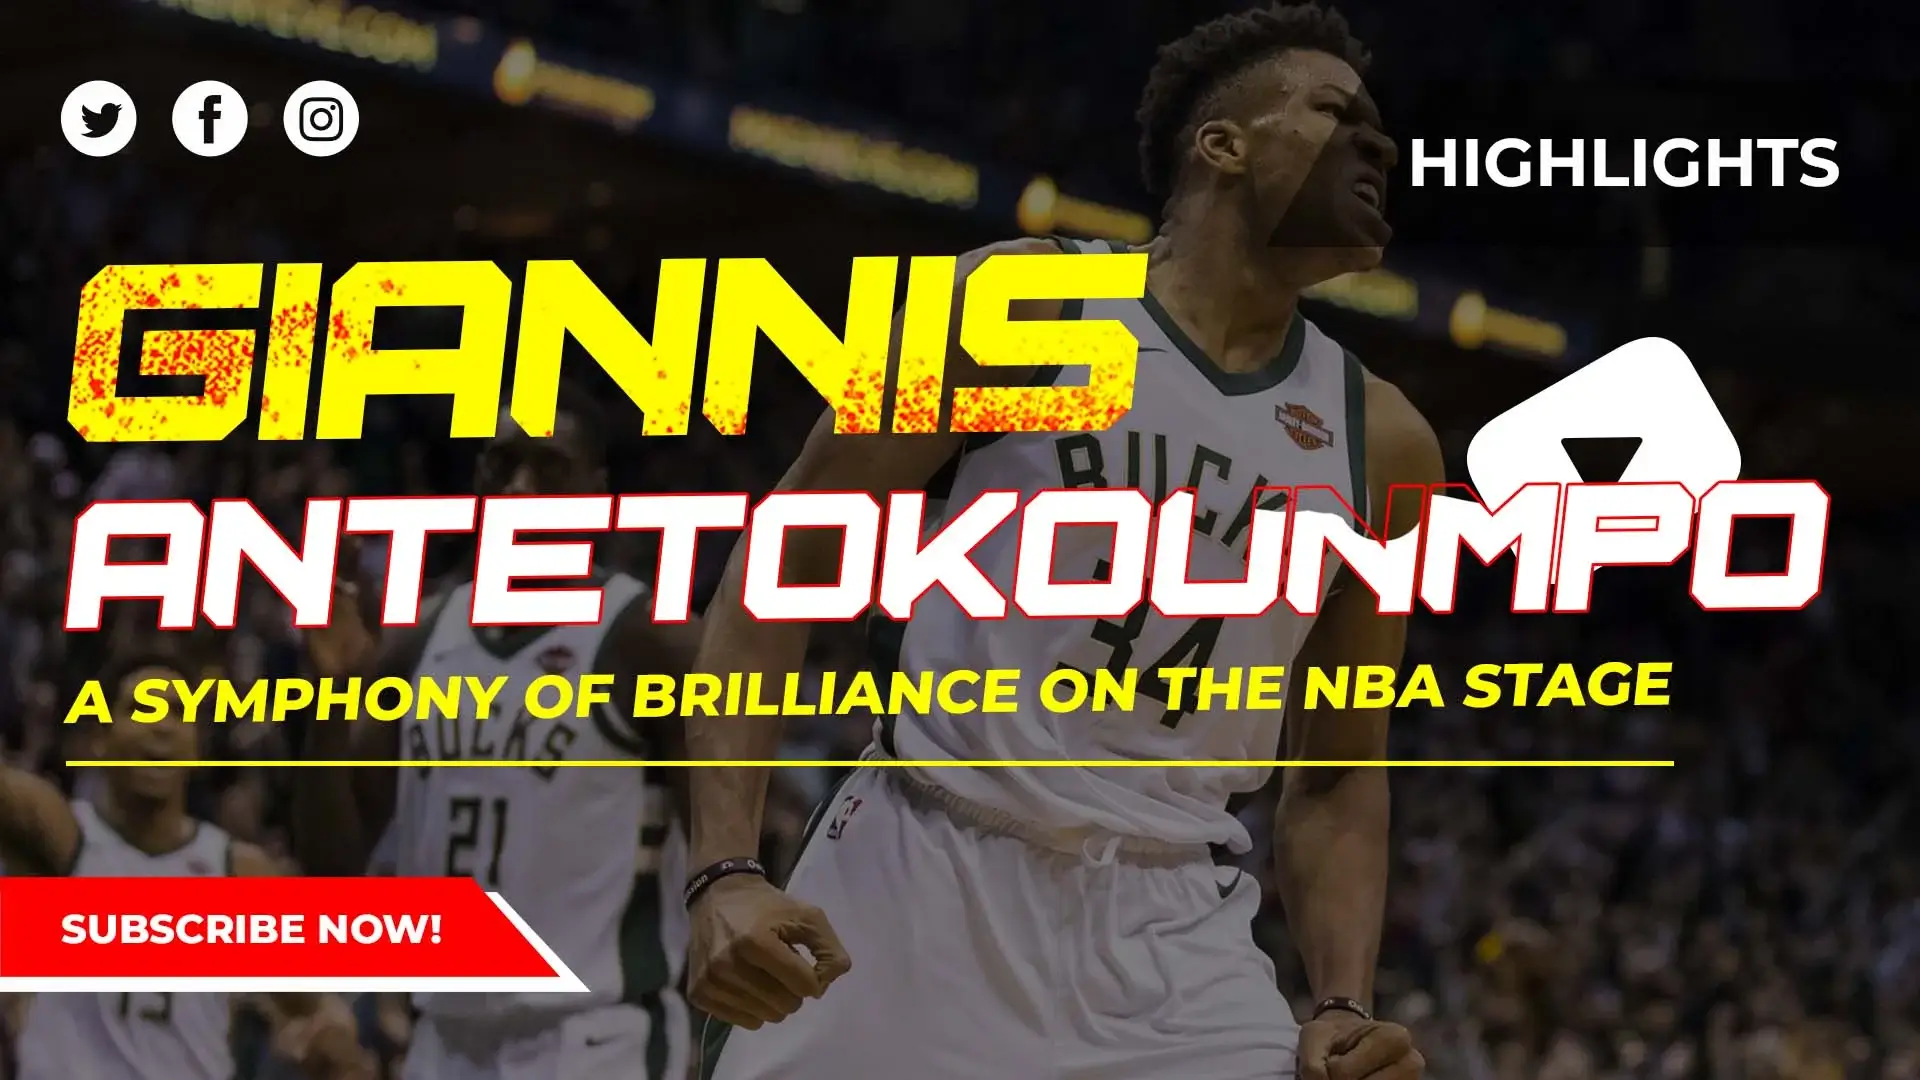 Giannis Antetokounmpo: A Symphony of Brilliance on the NBA Stage